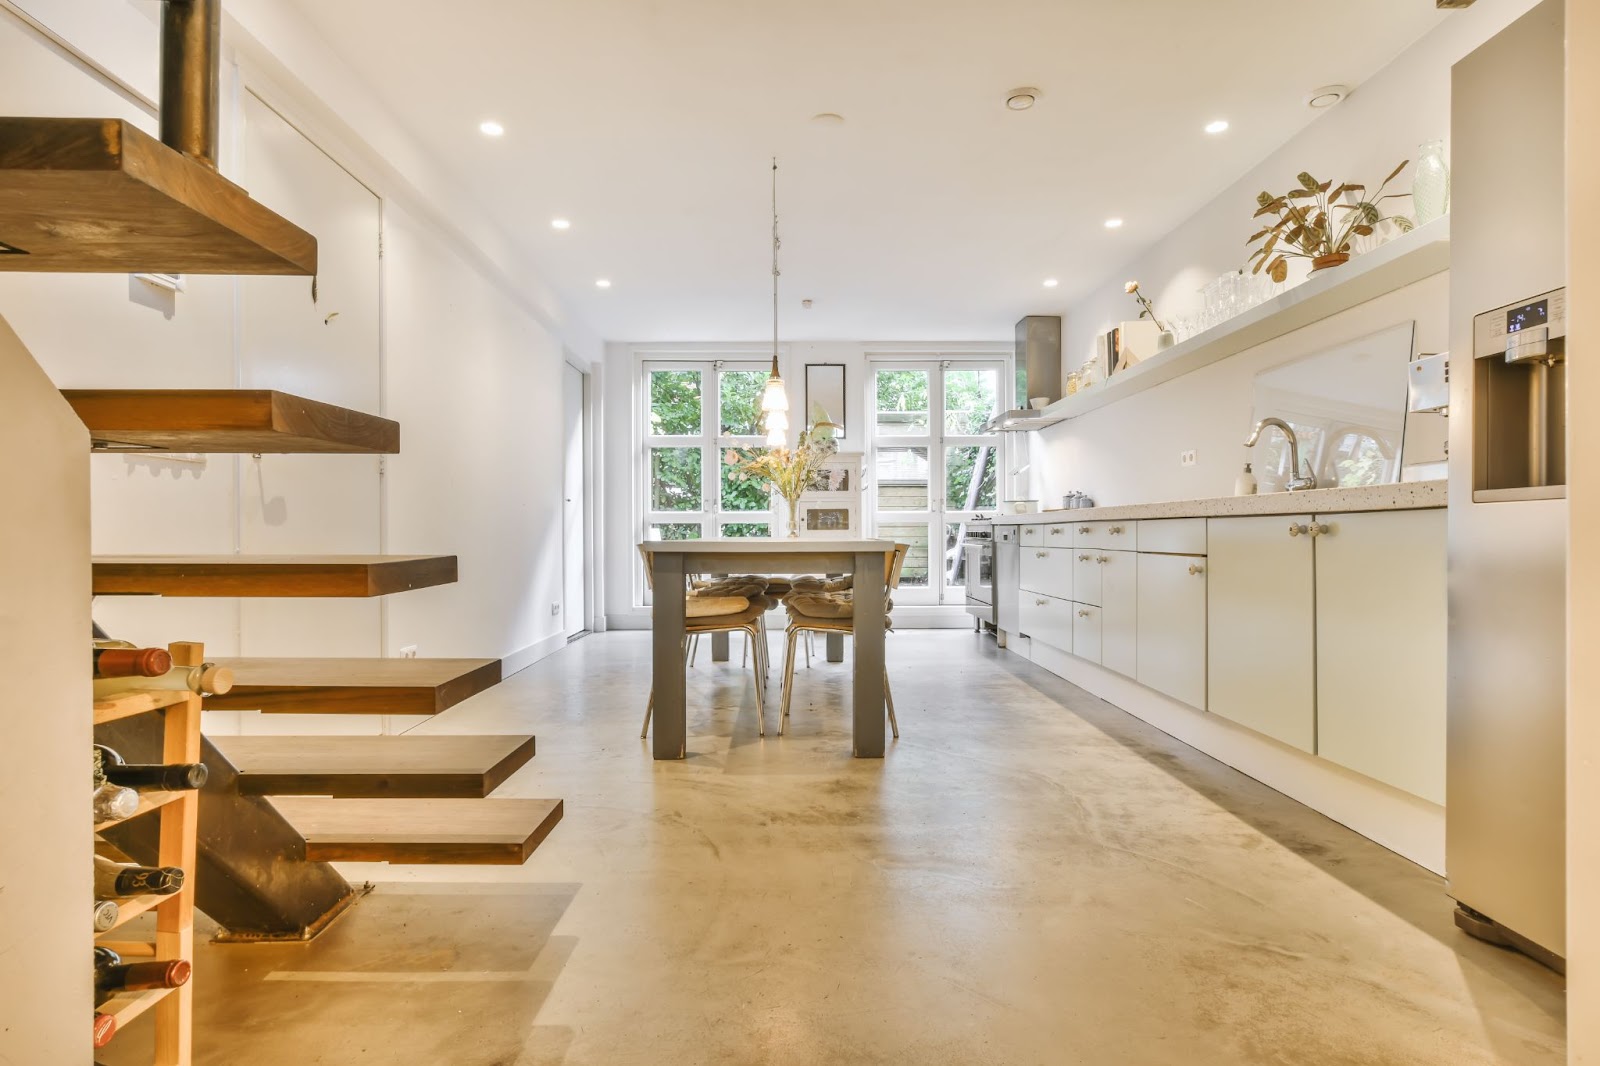 : A sleek and stylish dining area in cream and light brown hues featuring stained concrete floors, a wooden dining table in the center, shelves, and wooden stairs on the side, with glass doors in the background, creating a spacious feel.